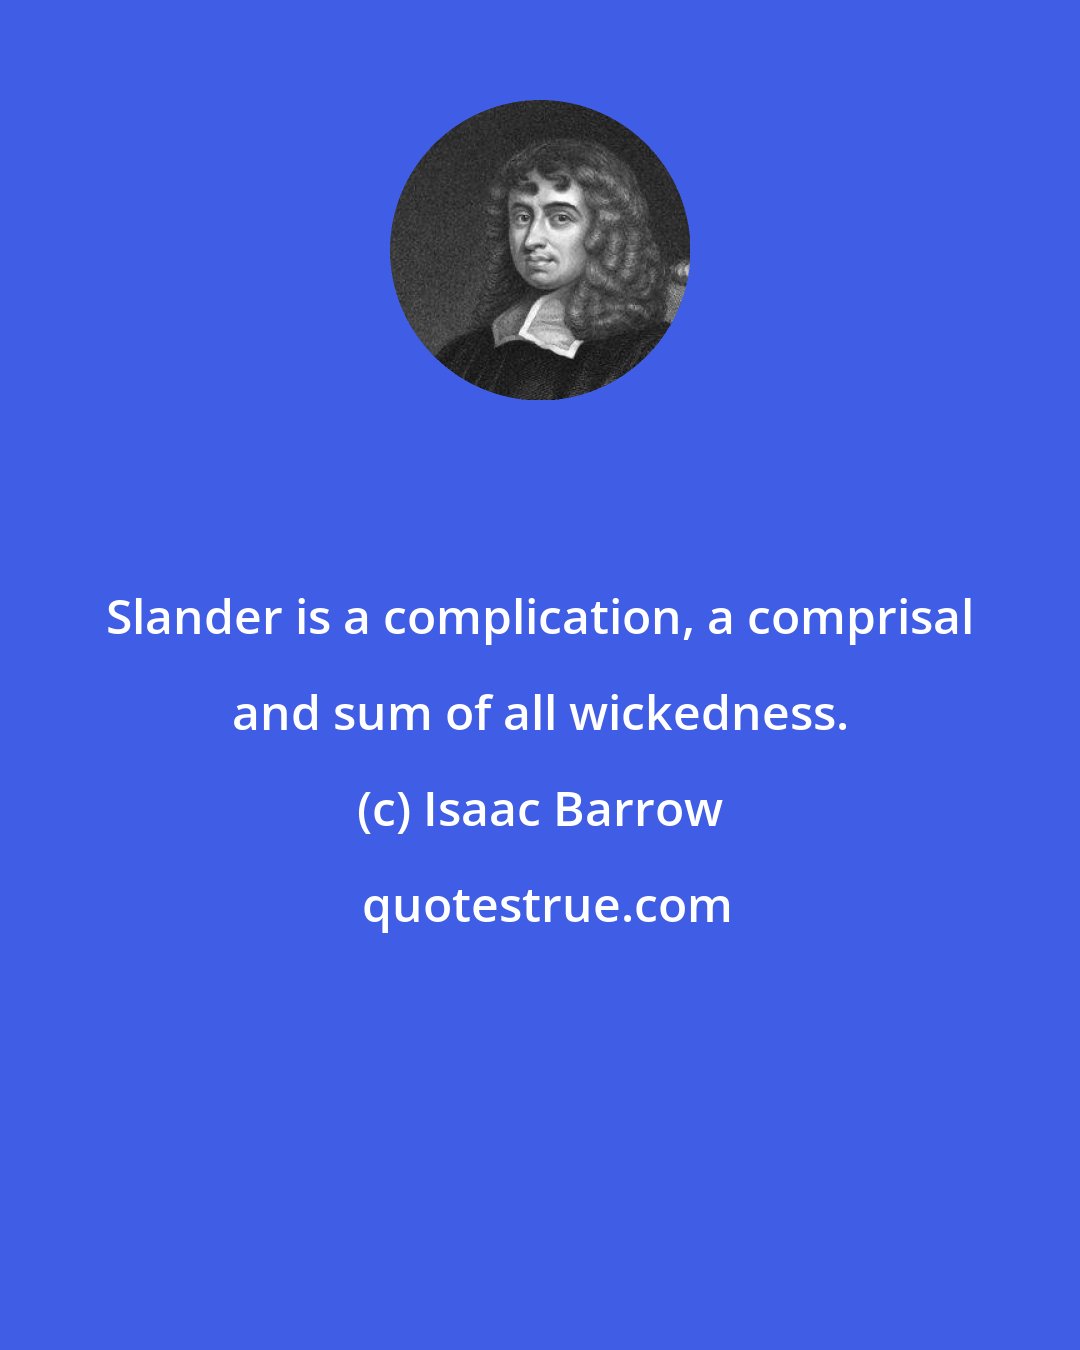 Isaac Barrow: Slander is a complication, a comprisal and sum of all wickedness.